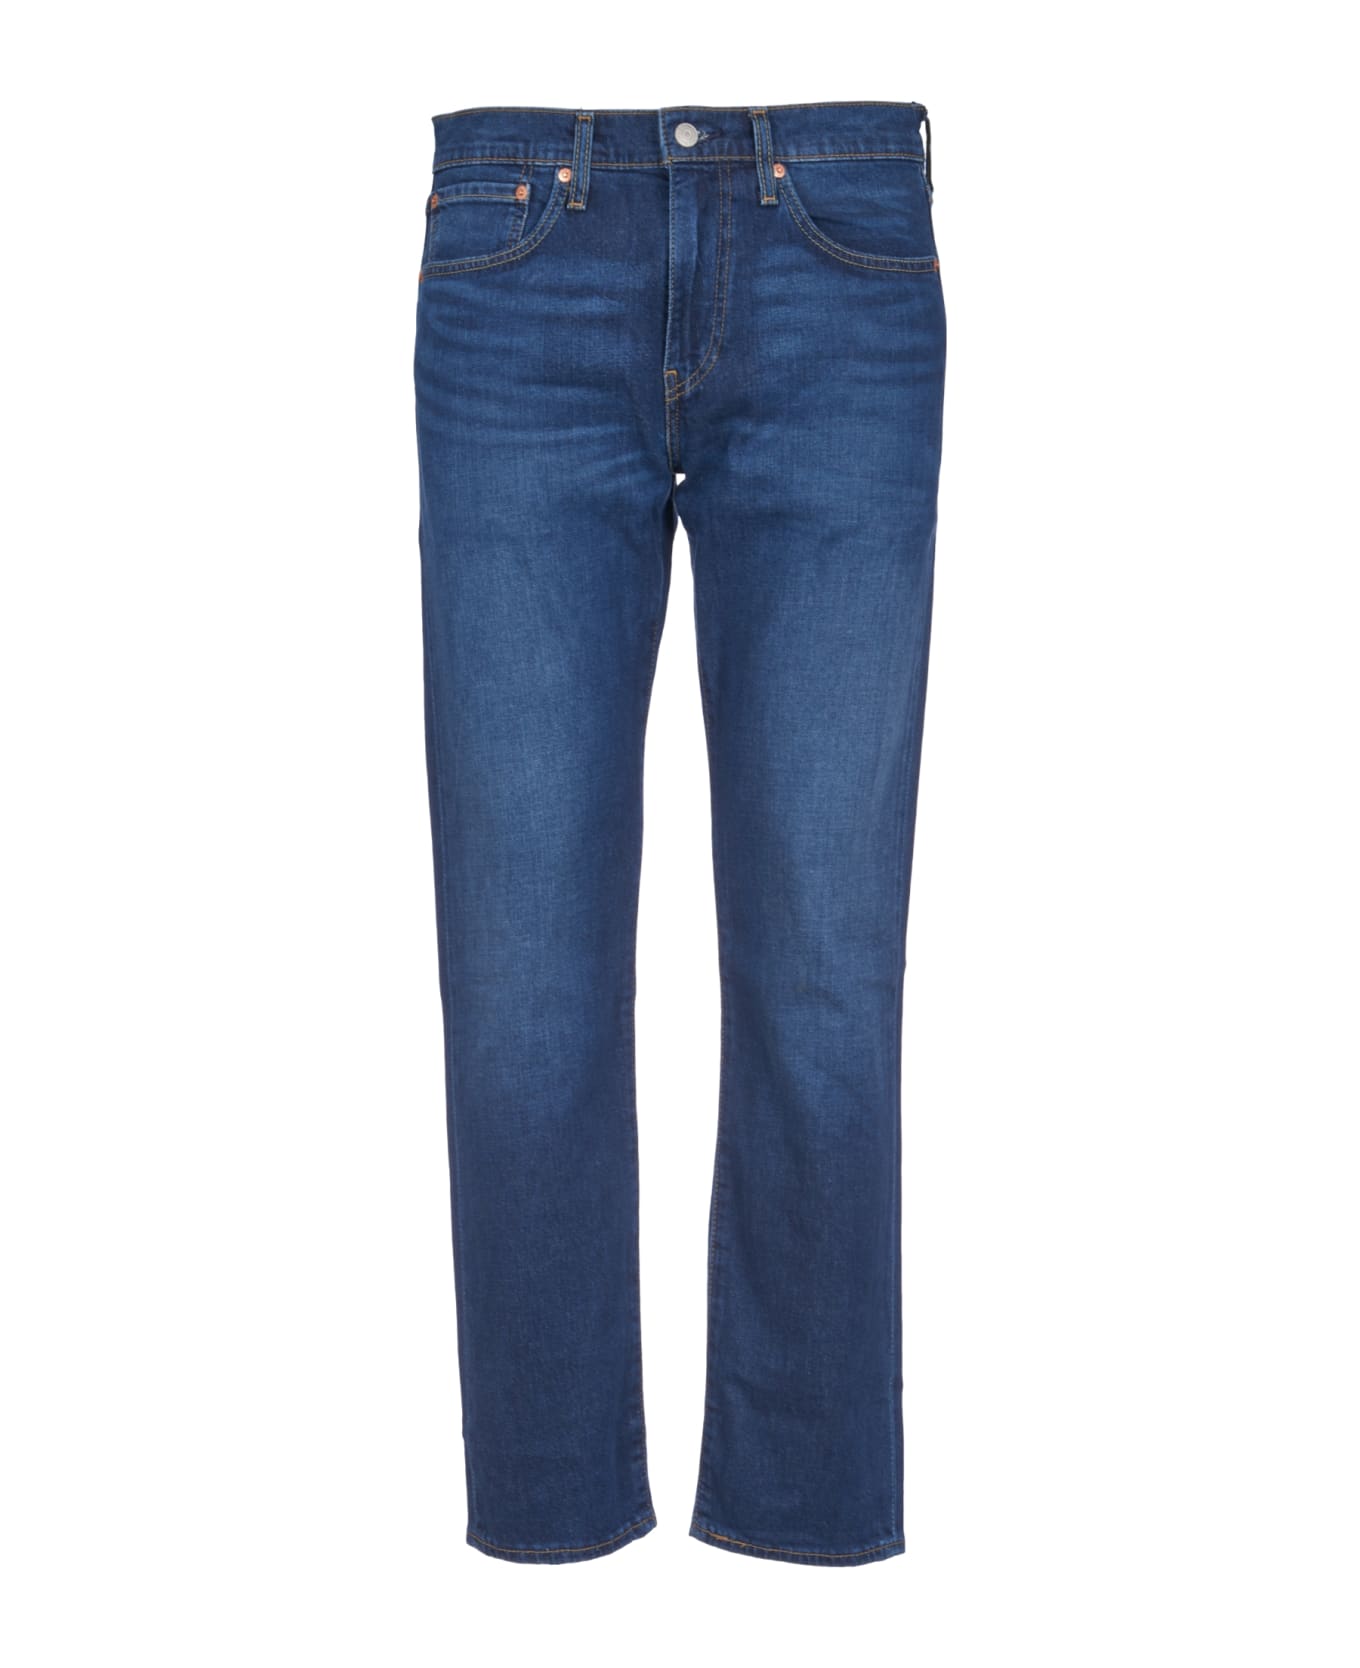 Levi's Buttoned Fitted Jeans - Mid Blue